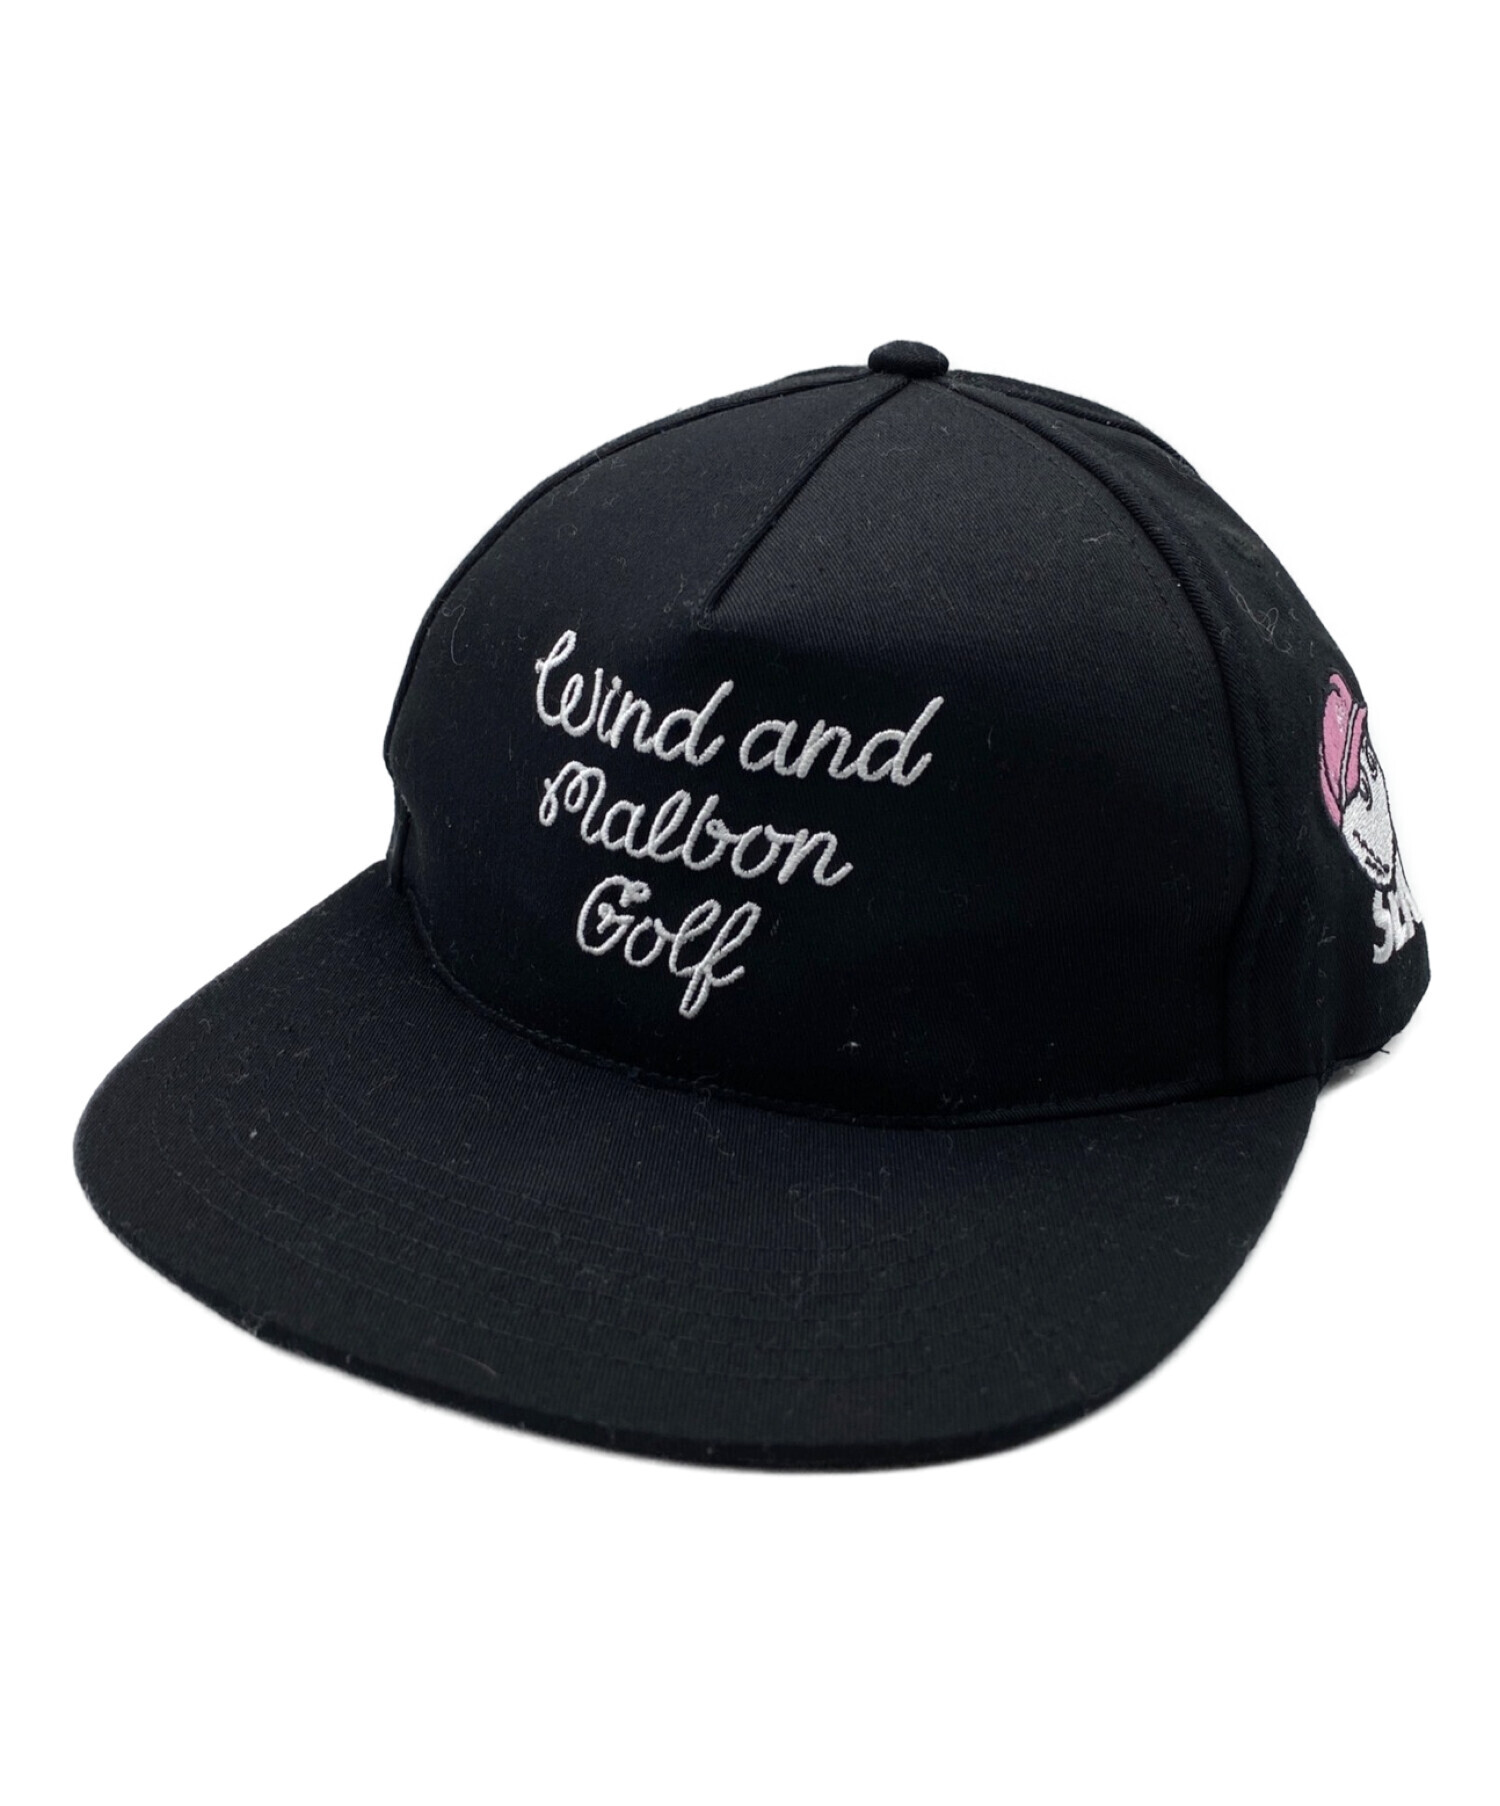 wind and sea WDS SNAP BACK / BLACKメンズ